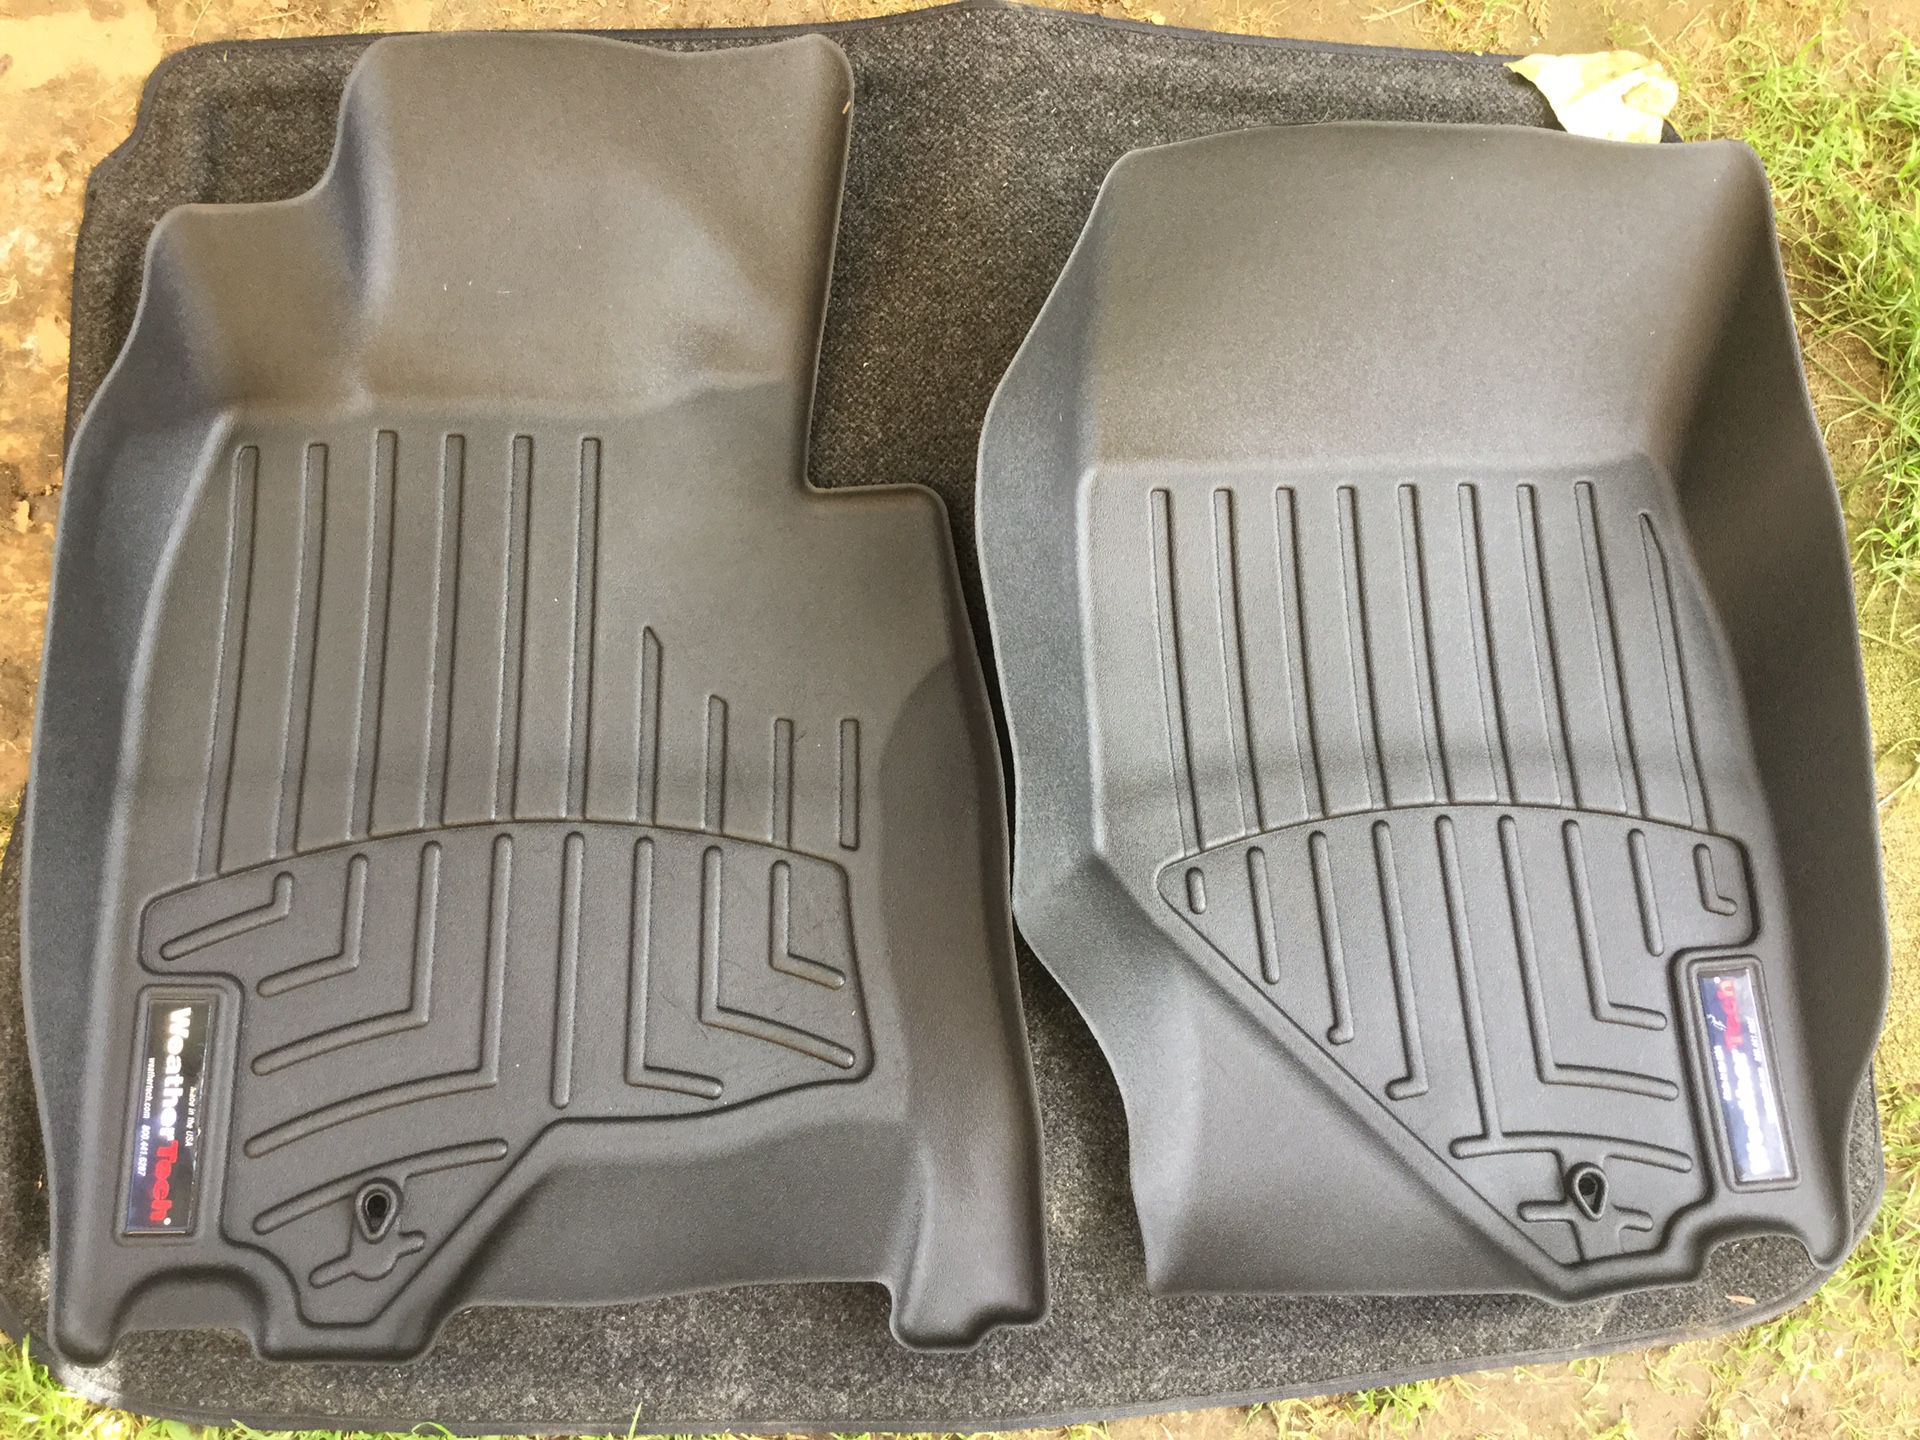 WeatherTech Floor Liners for a Infiniti G35, G37